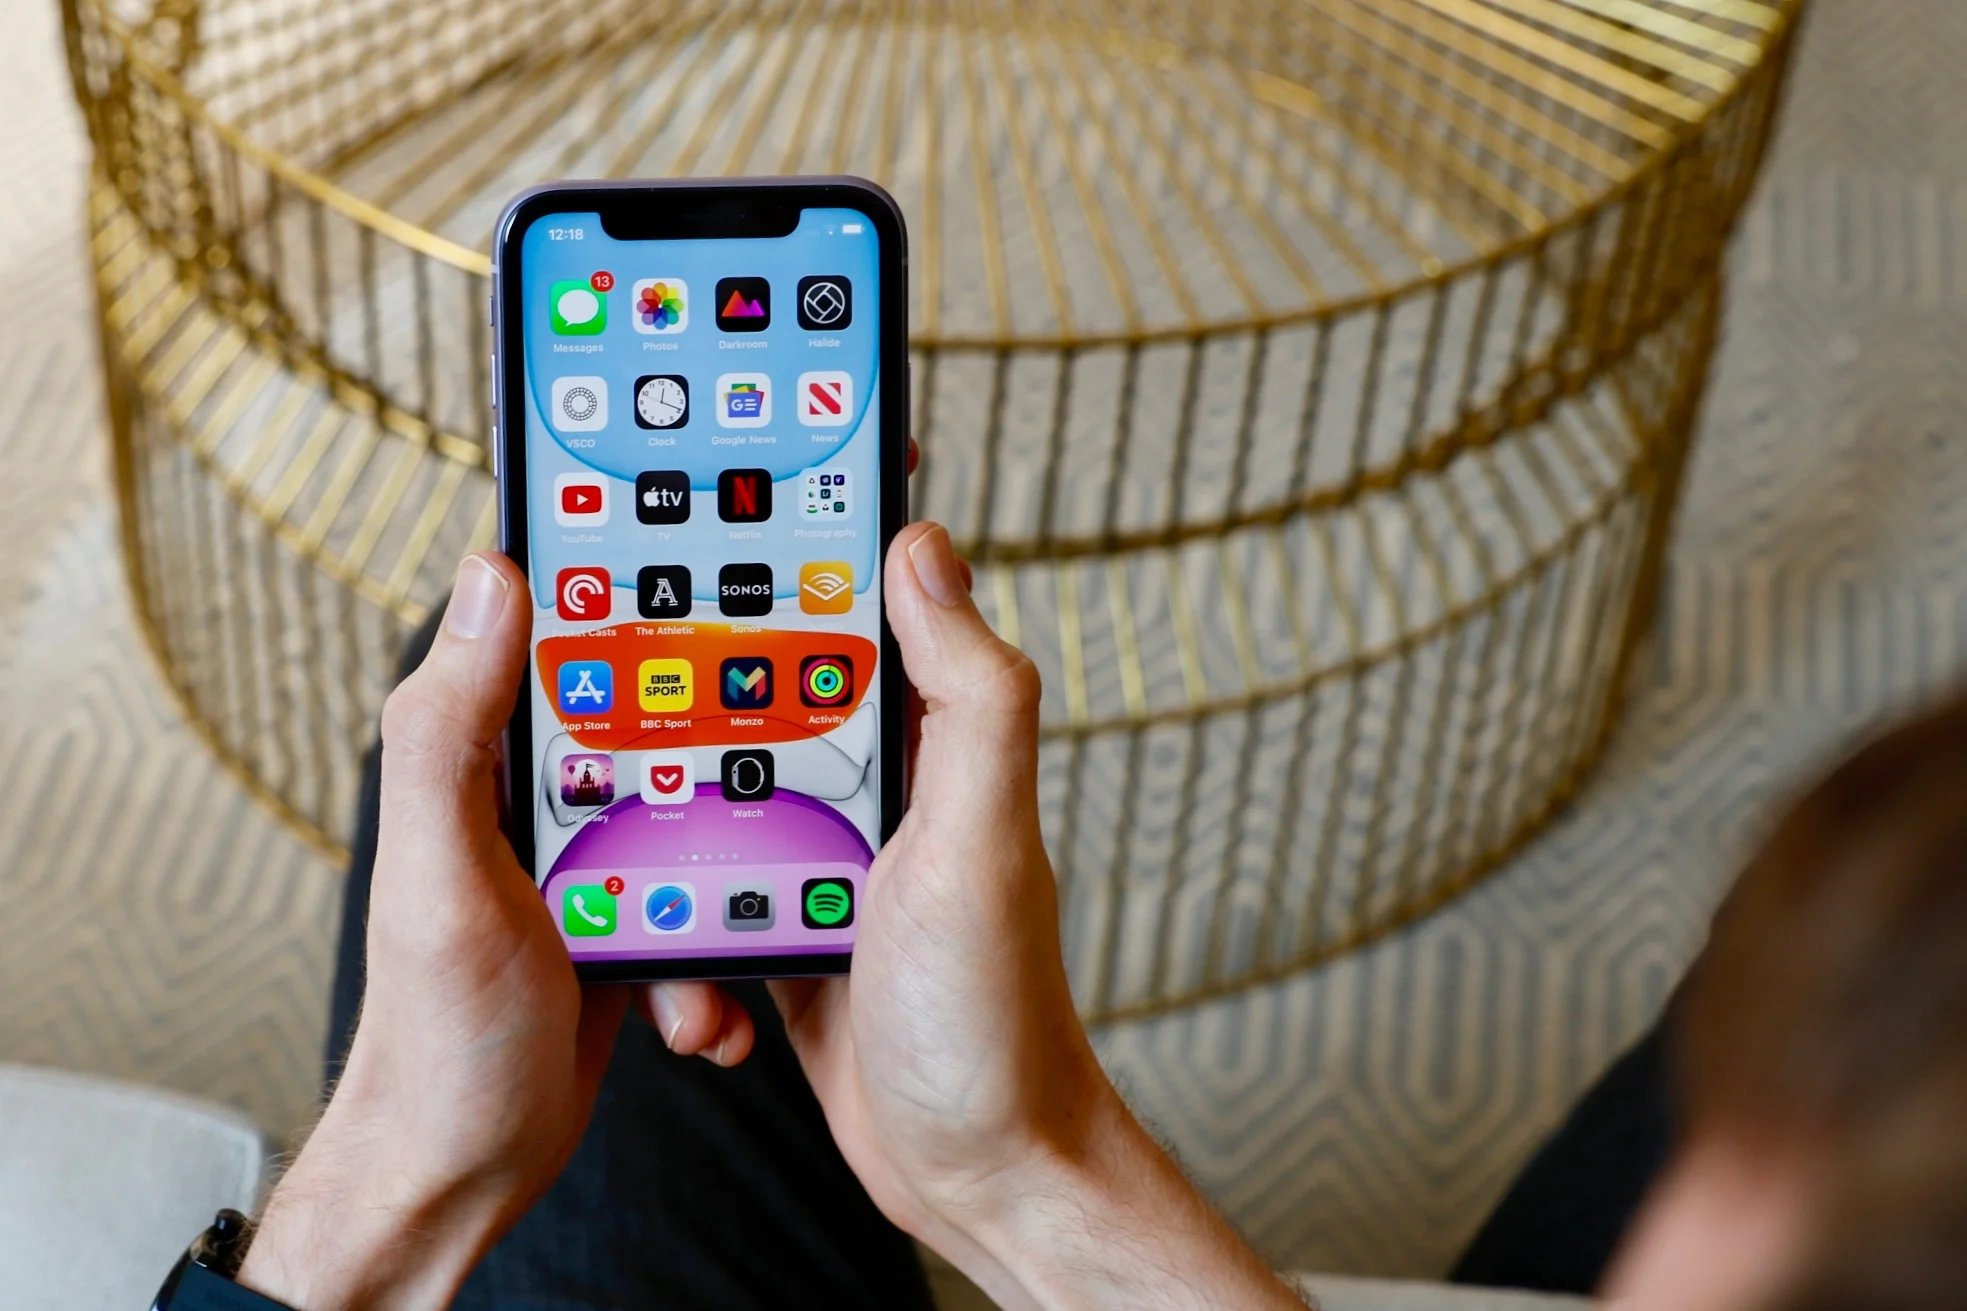 Home Screen Navigation: Returning To The Home Screen On IPhone 11